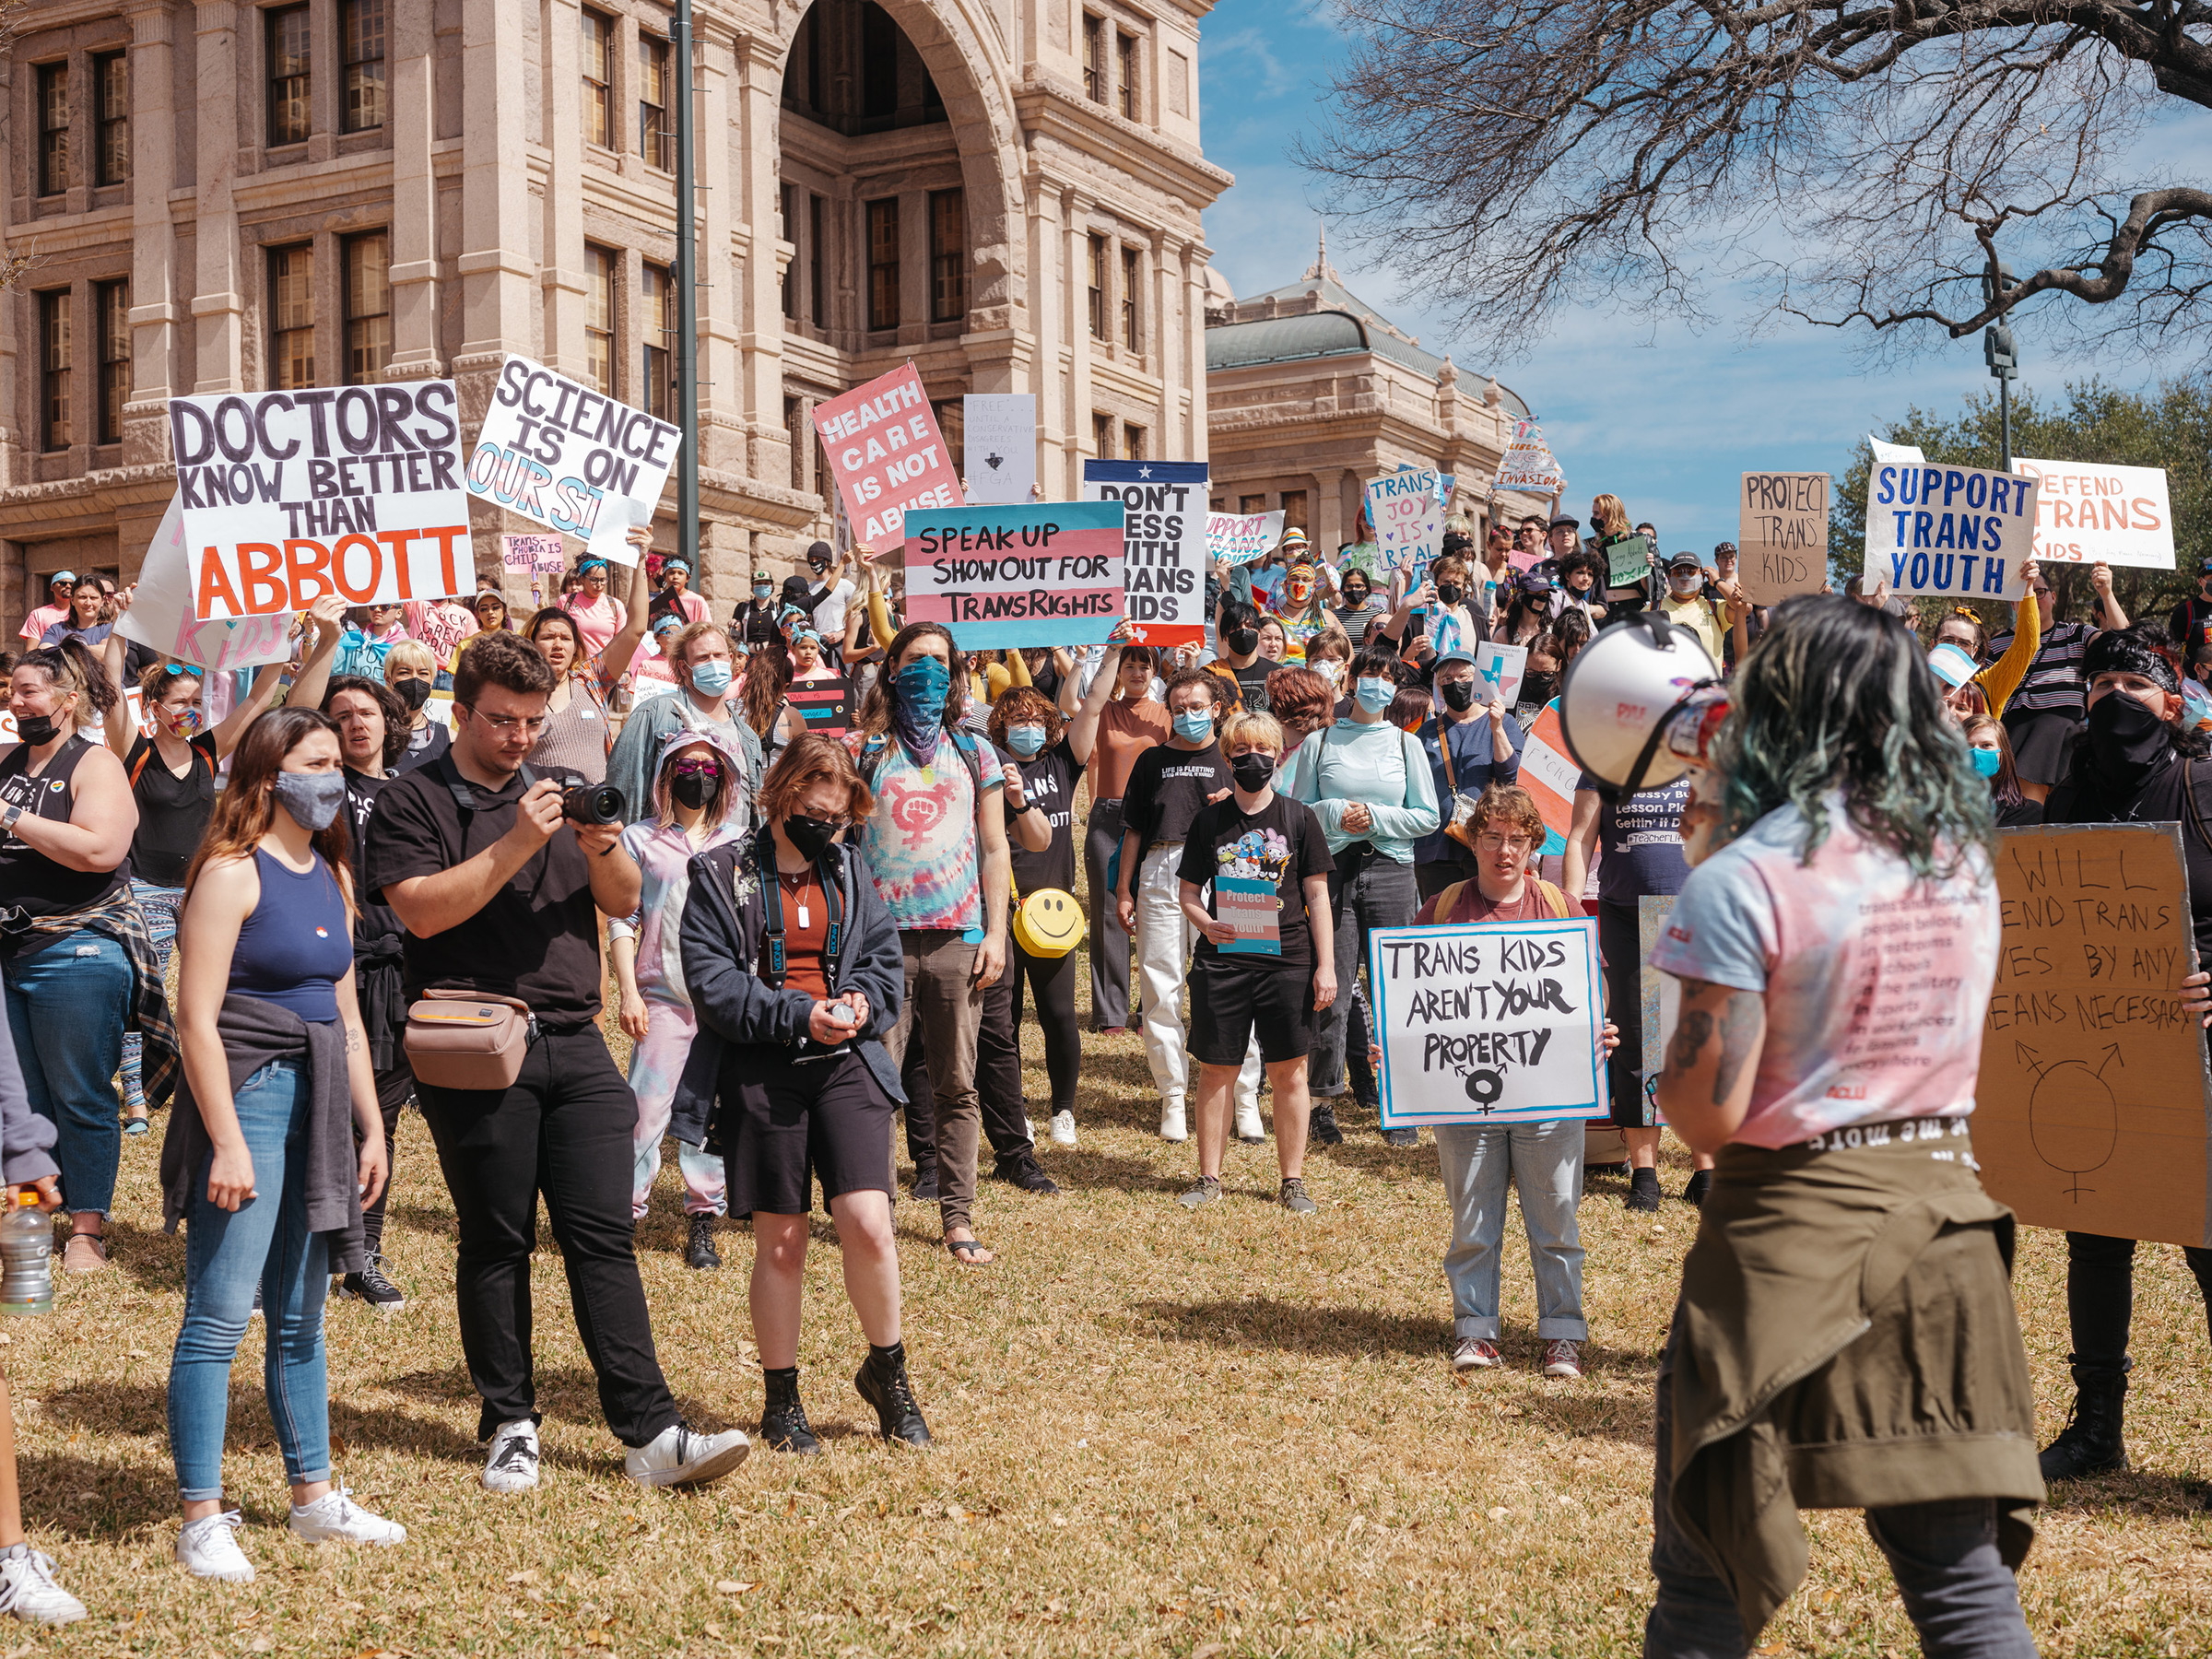 Demonstrators protest a Texas policy to regard gender-affirming treatments for transgender youth as "child abuse," at the State Capitol in Austin, March 1, 2022. (Christopher Lee—The New York Times/Redux)